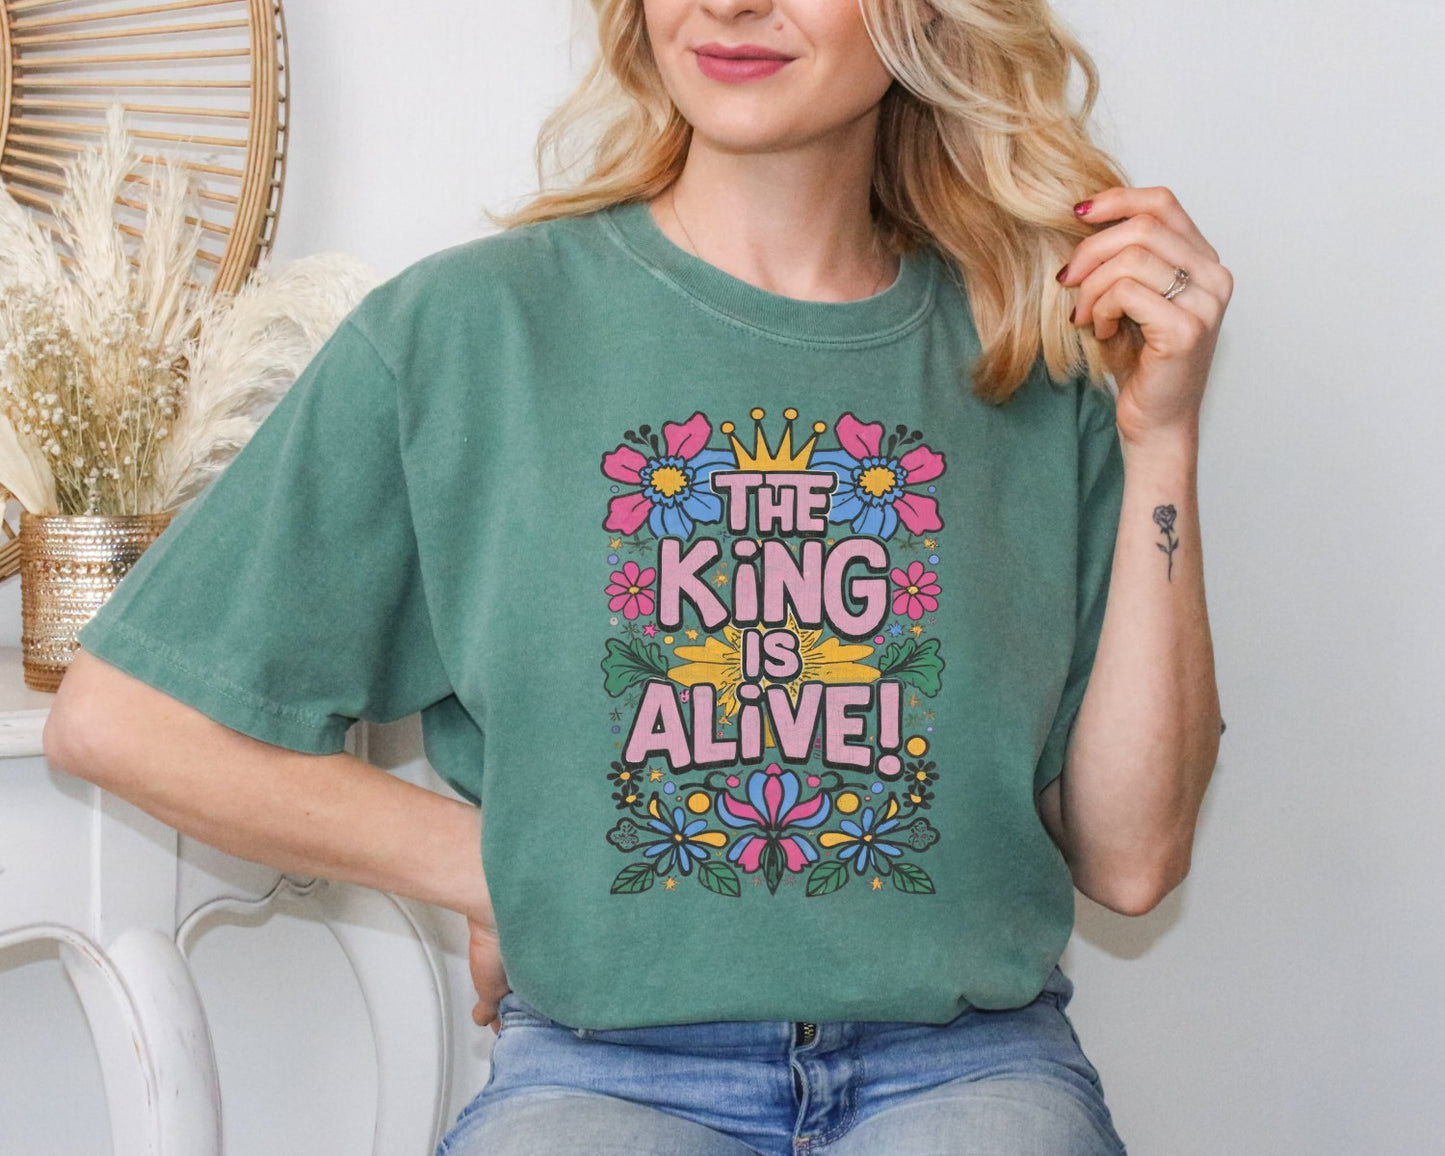 The King is Alive 2 Christian Easter Shirt